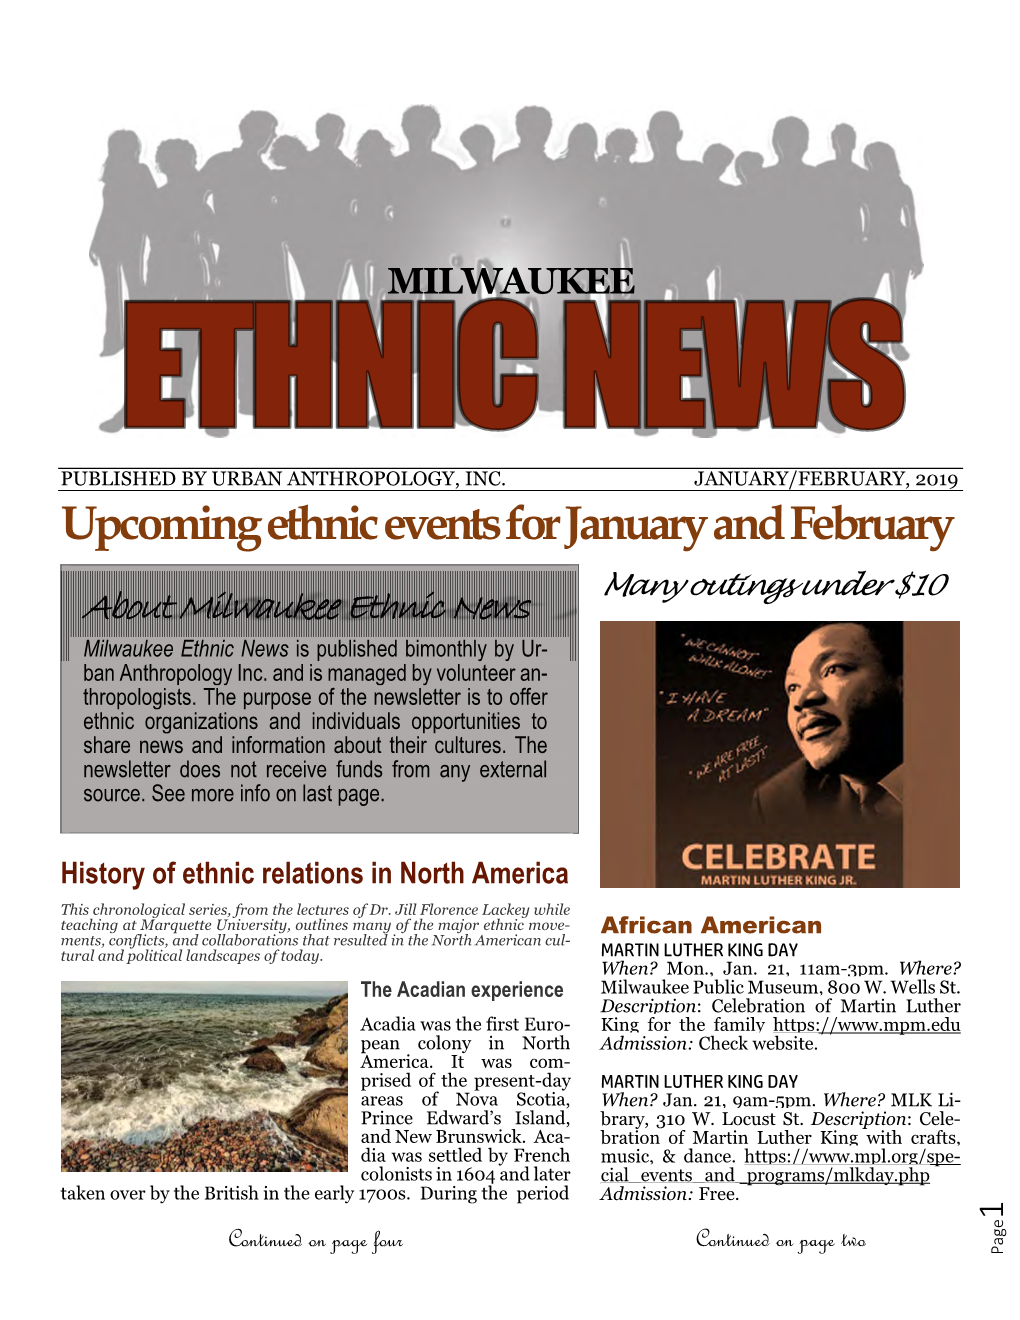 Upcoming Ethnic Events for January and February